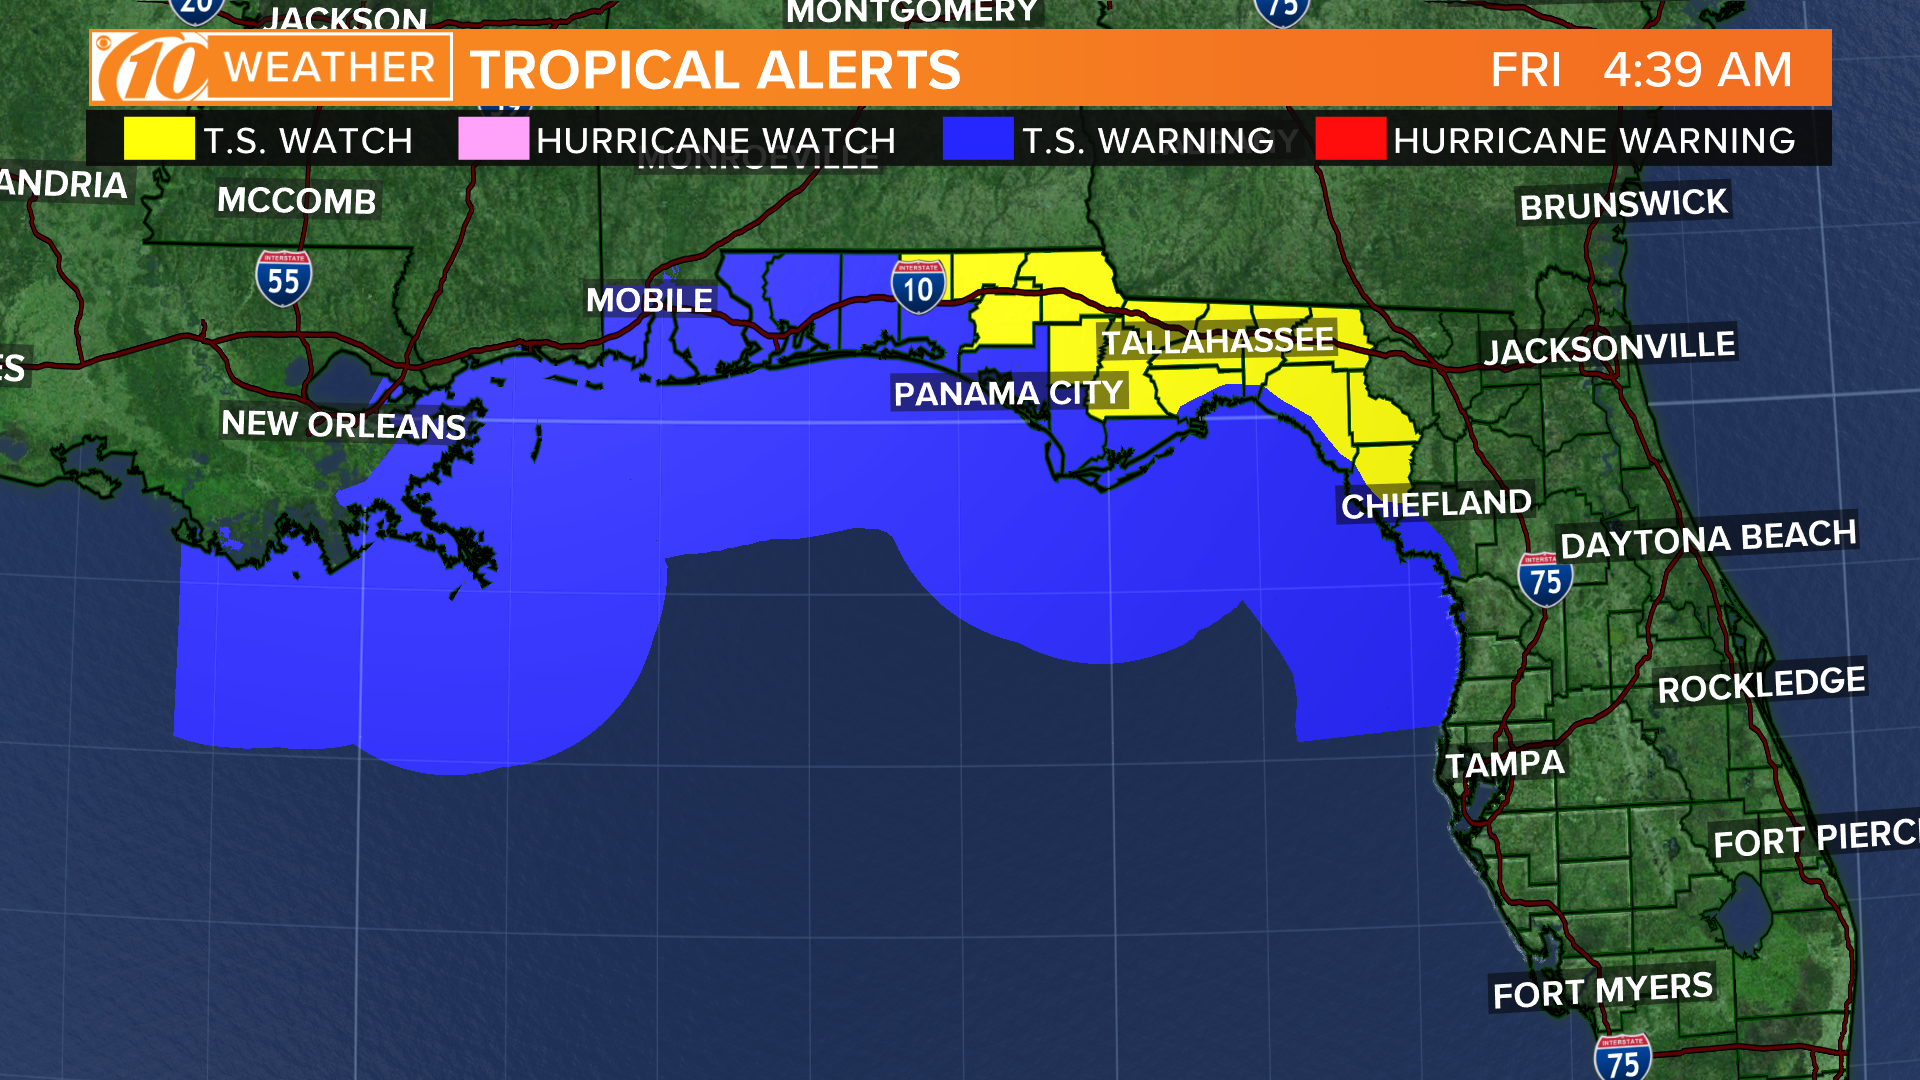 There are tropical watches and warnings along Gulf Coast states, including the Florida Panhandle and into the Tampa Bay area.